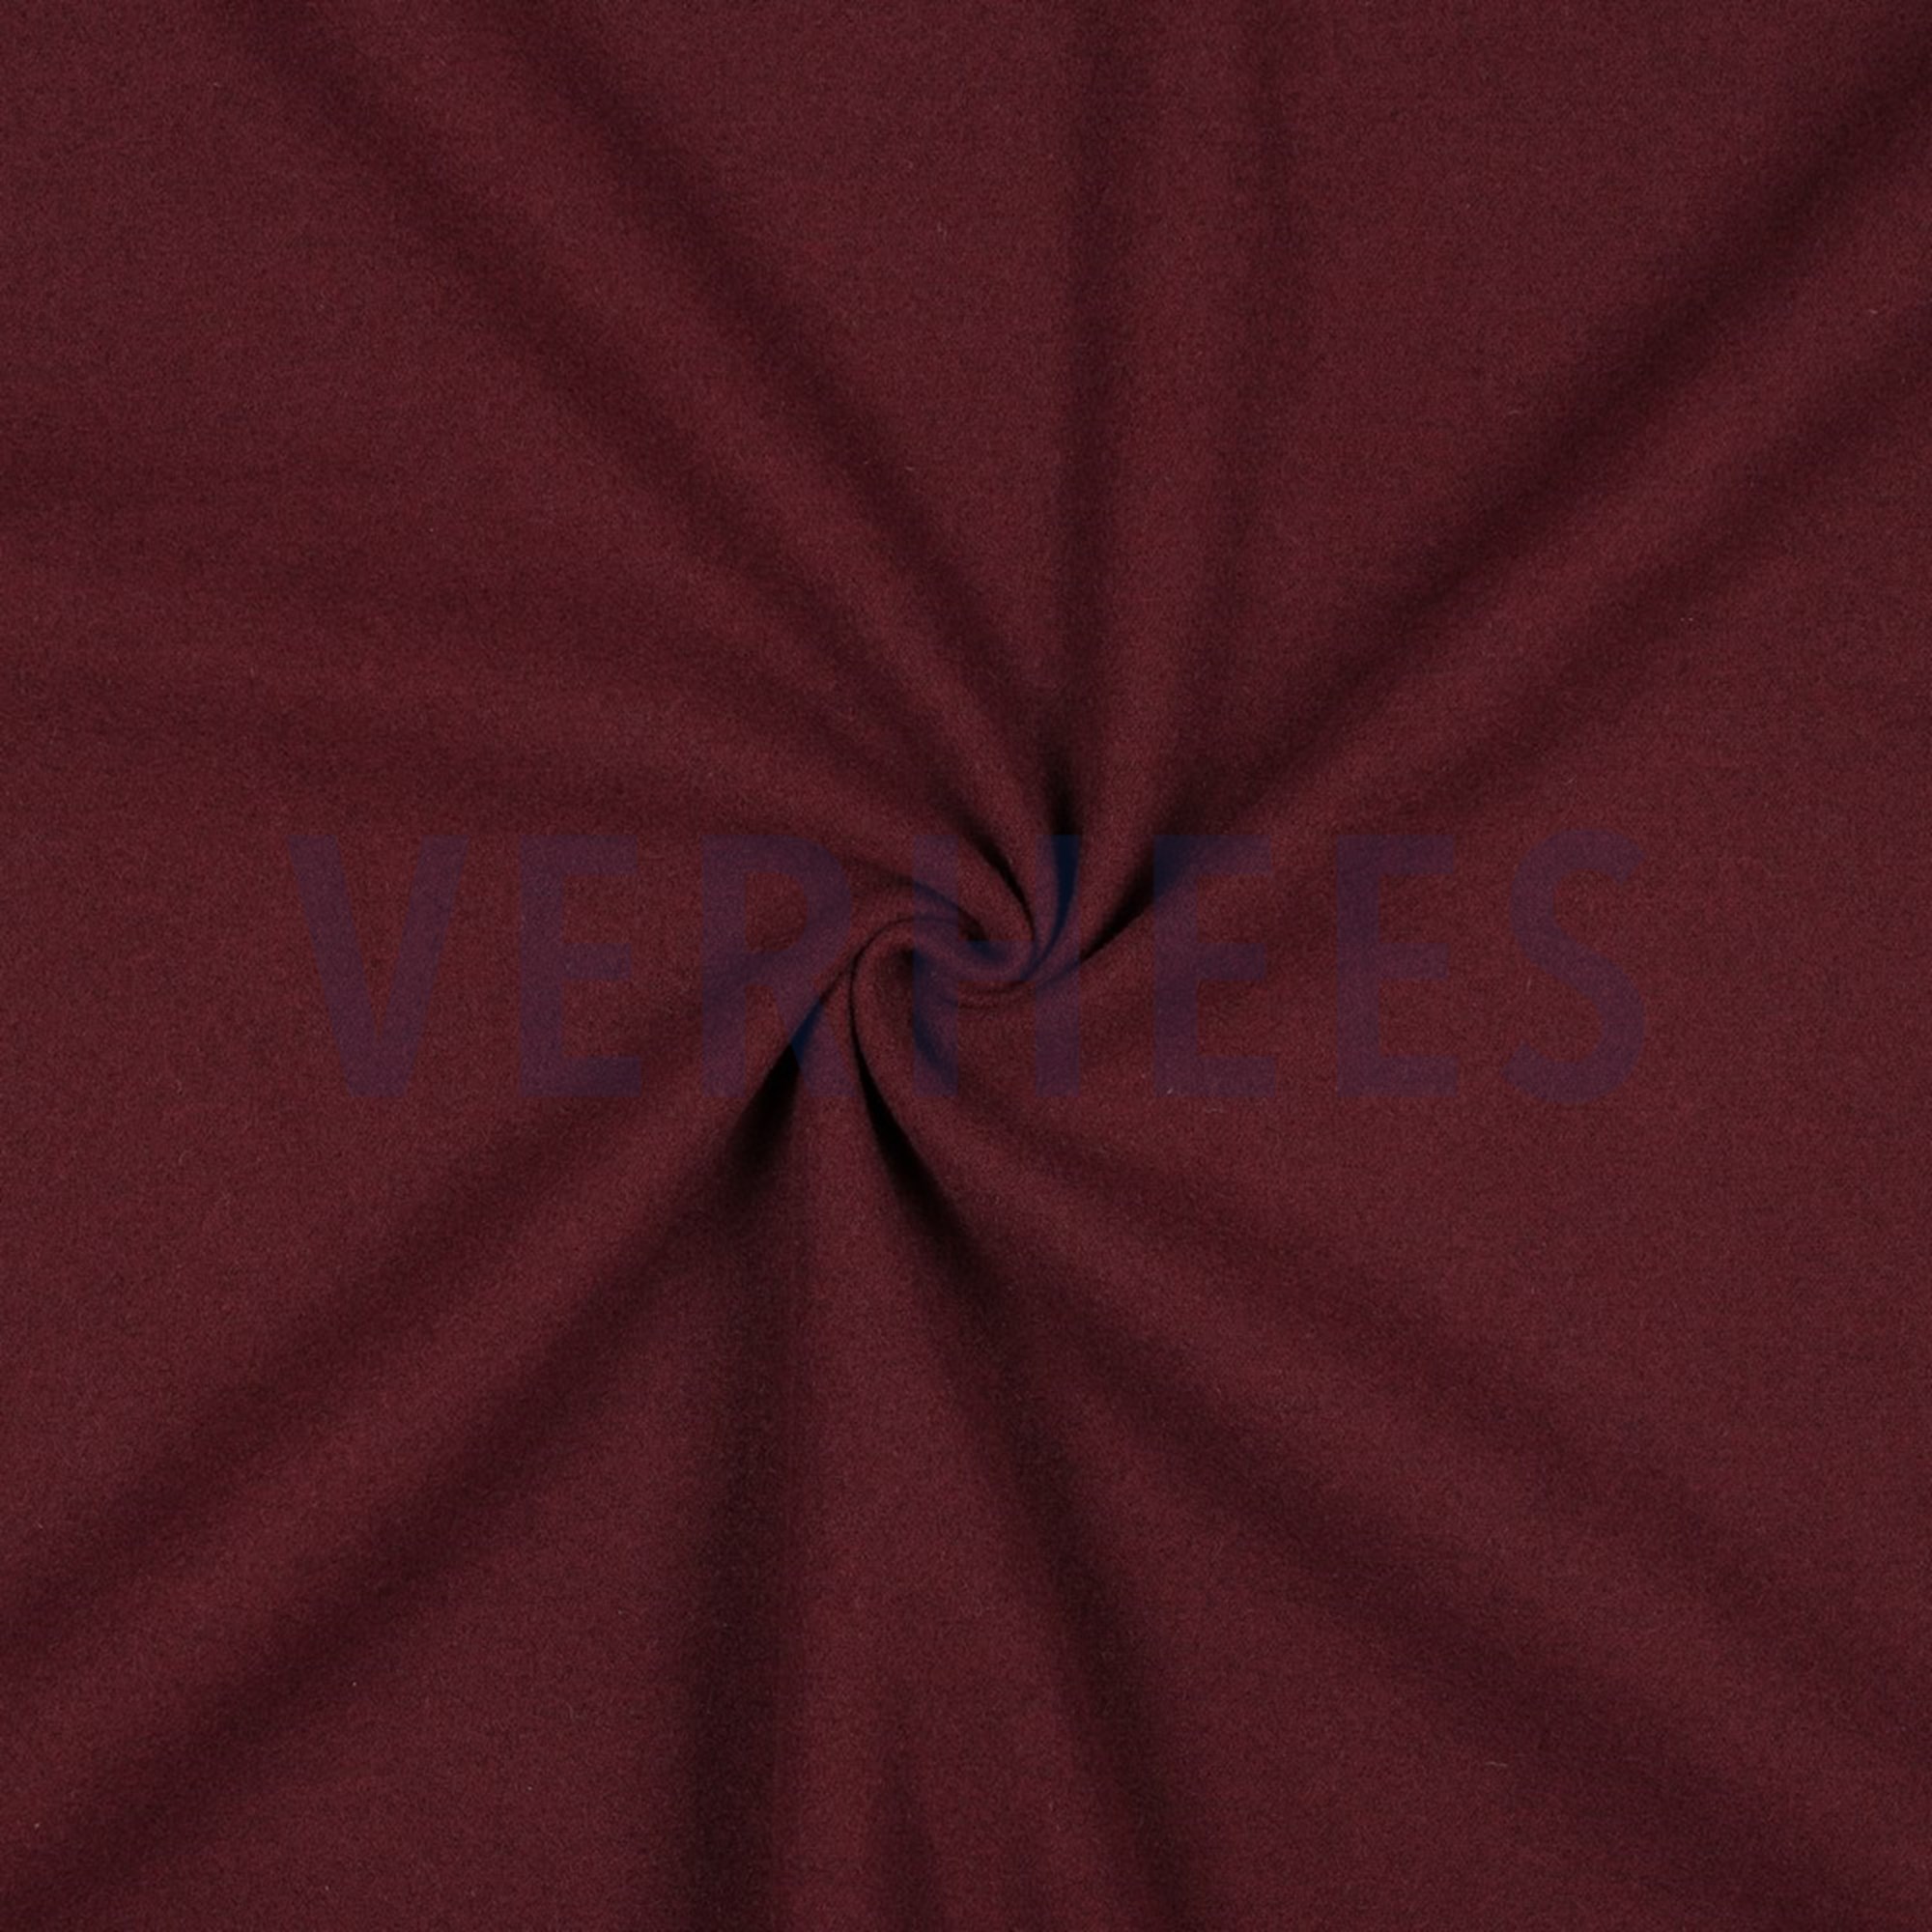 SOFTCOAT WINE RED (high resolution) #3